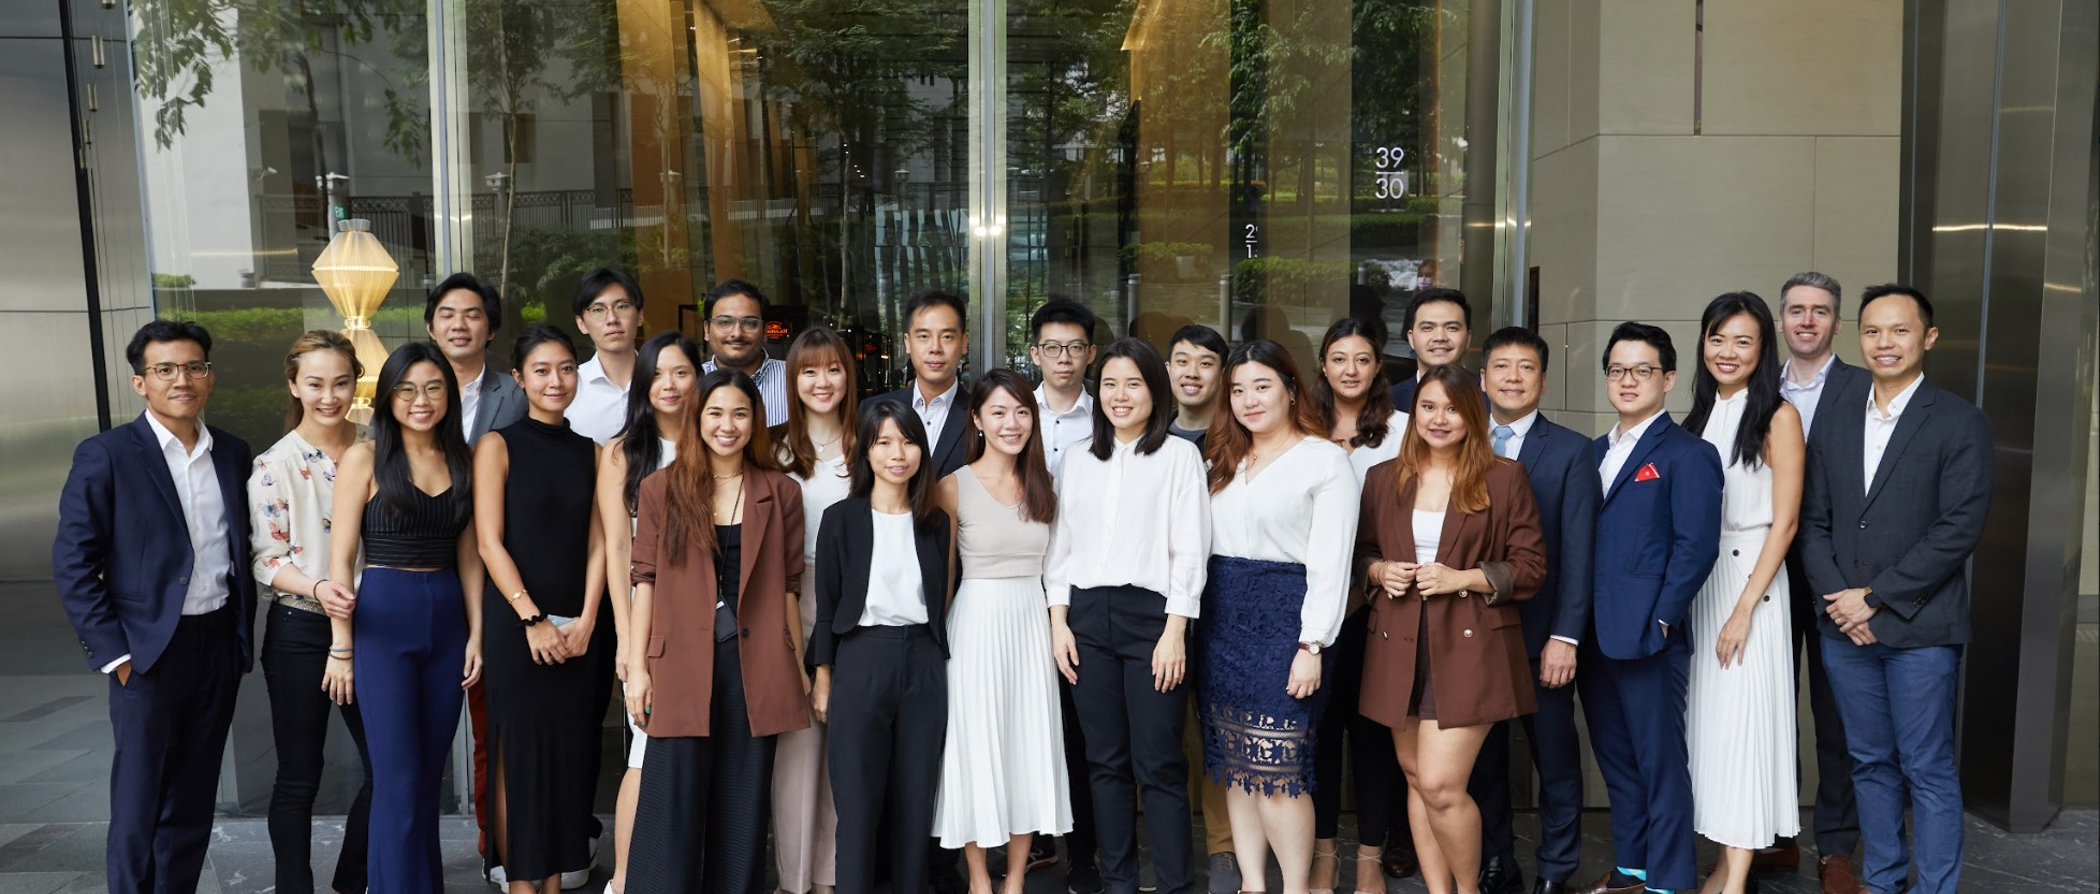 Alta Group is looking for a full-stack Software Engineering Intern to join our HQ in Singapore!